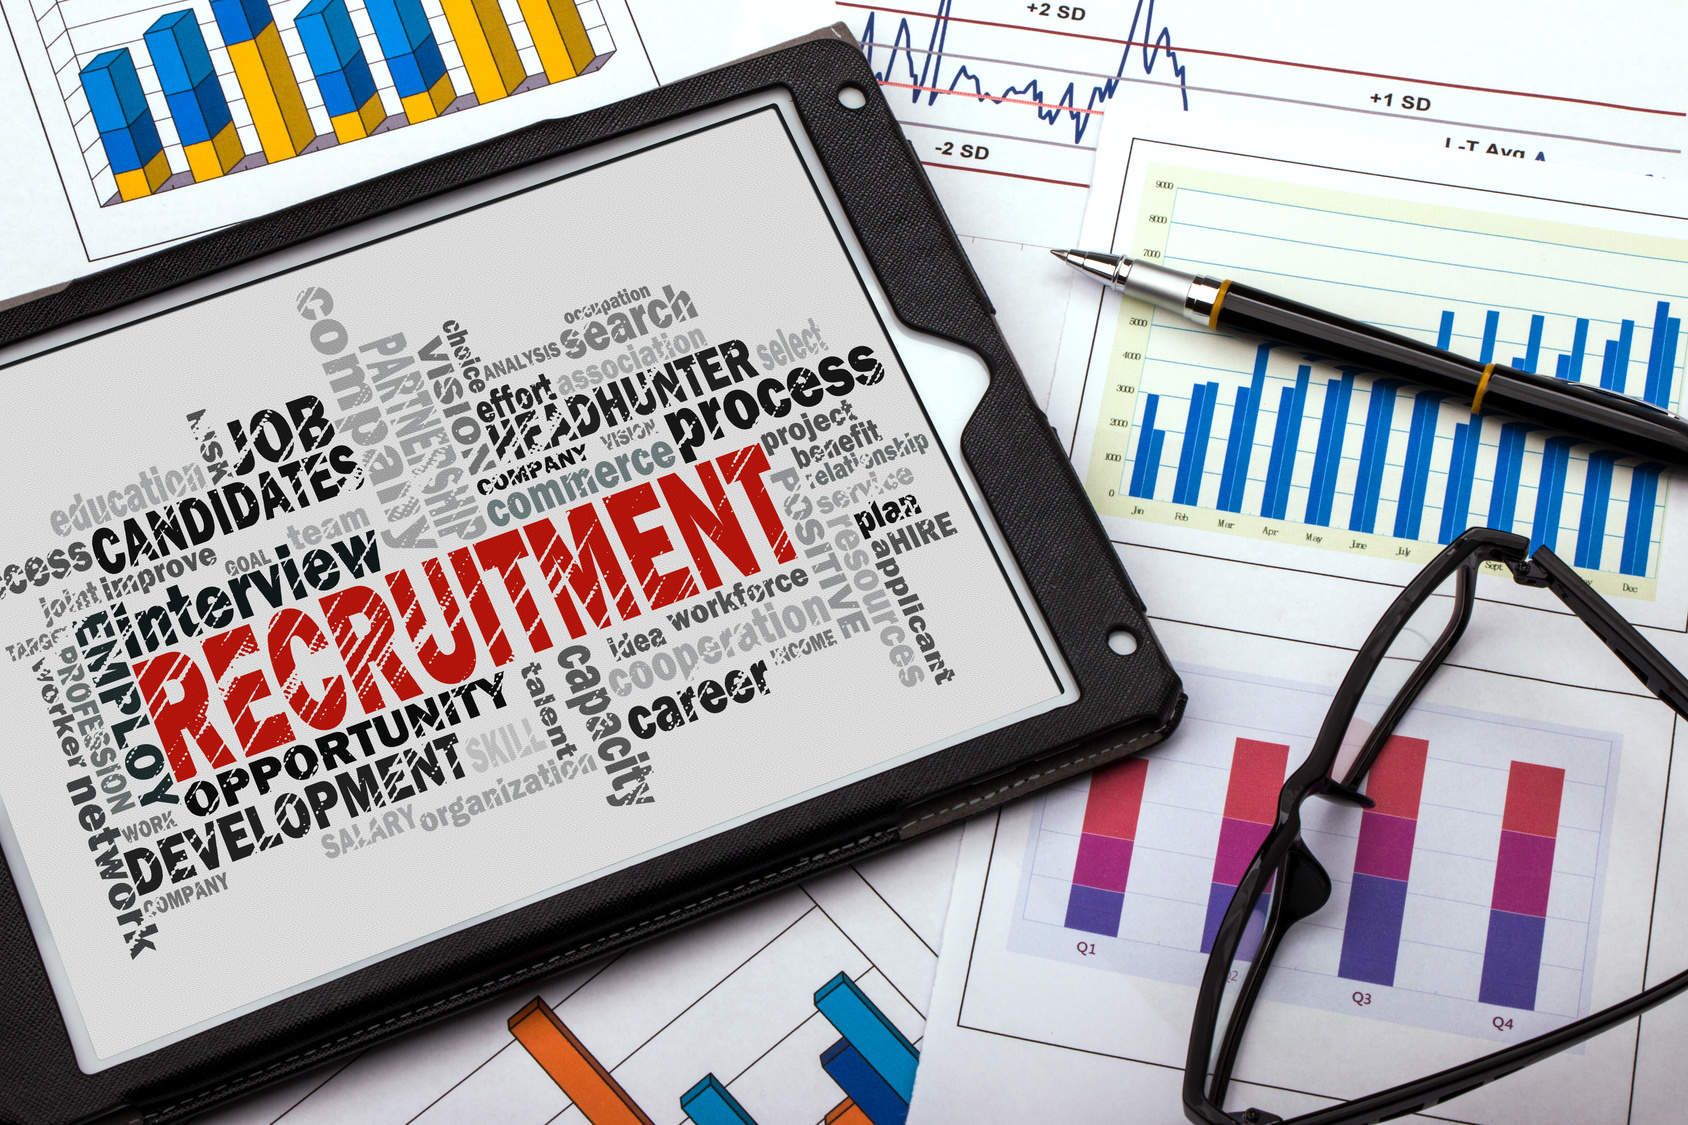 Are there fewer contract opportunities in the IT jobs market right now?